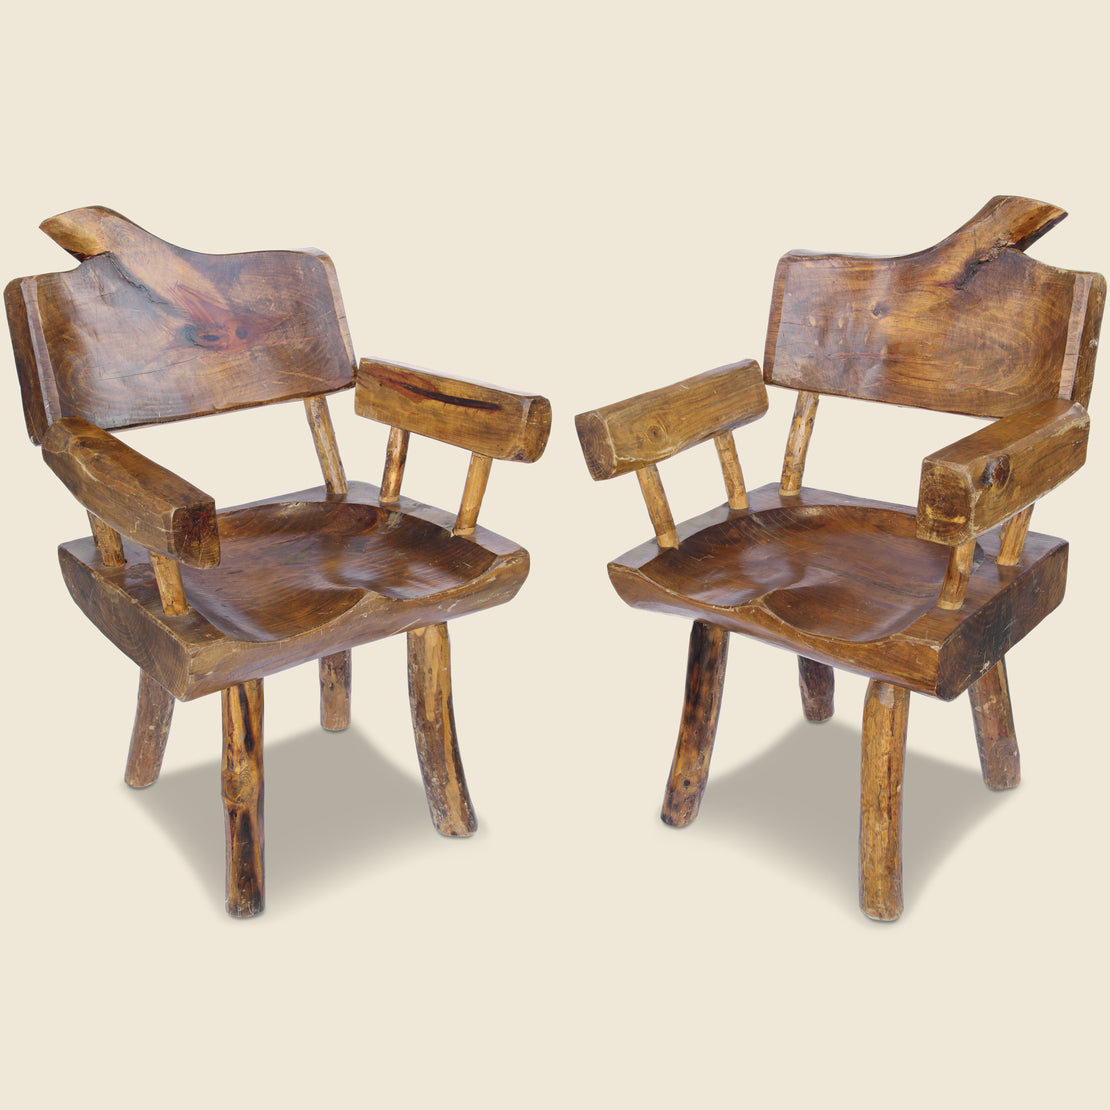 Pair of Vintage Rustic Wood Chairs - Vintage - STAG Provisions - One & Done - Furniture